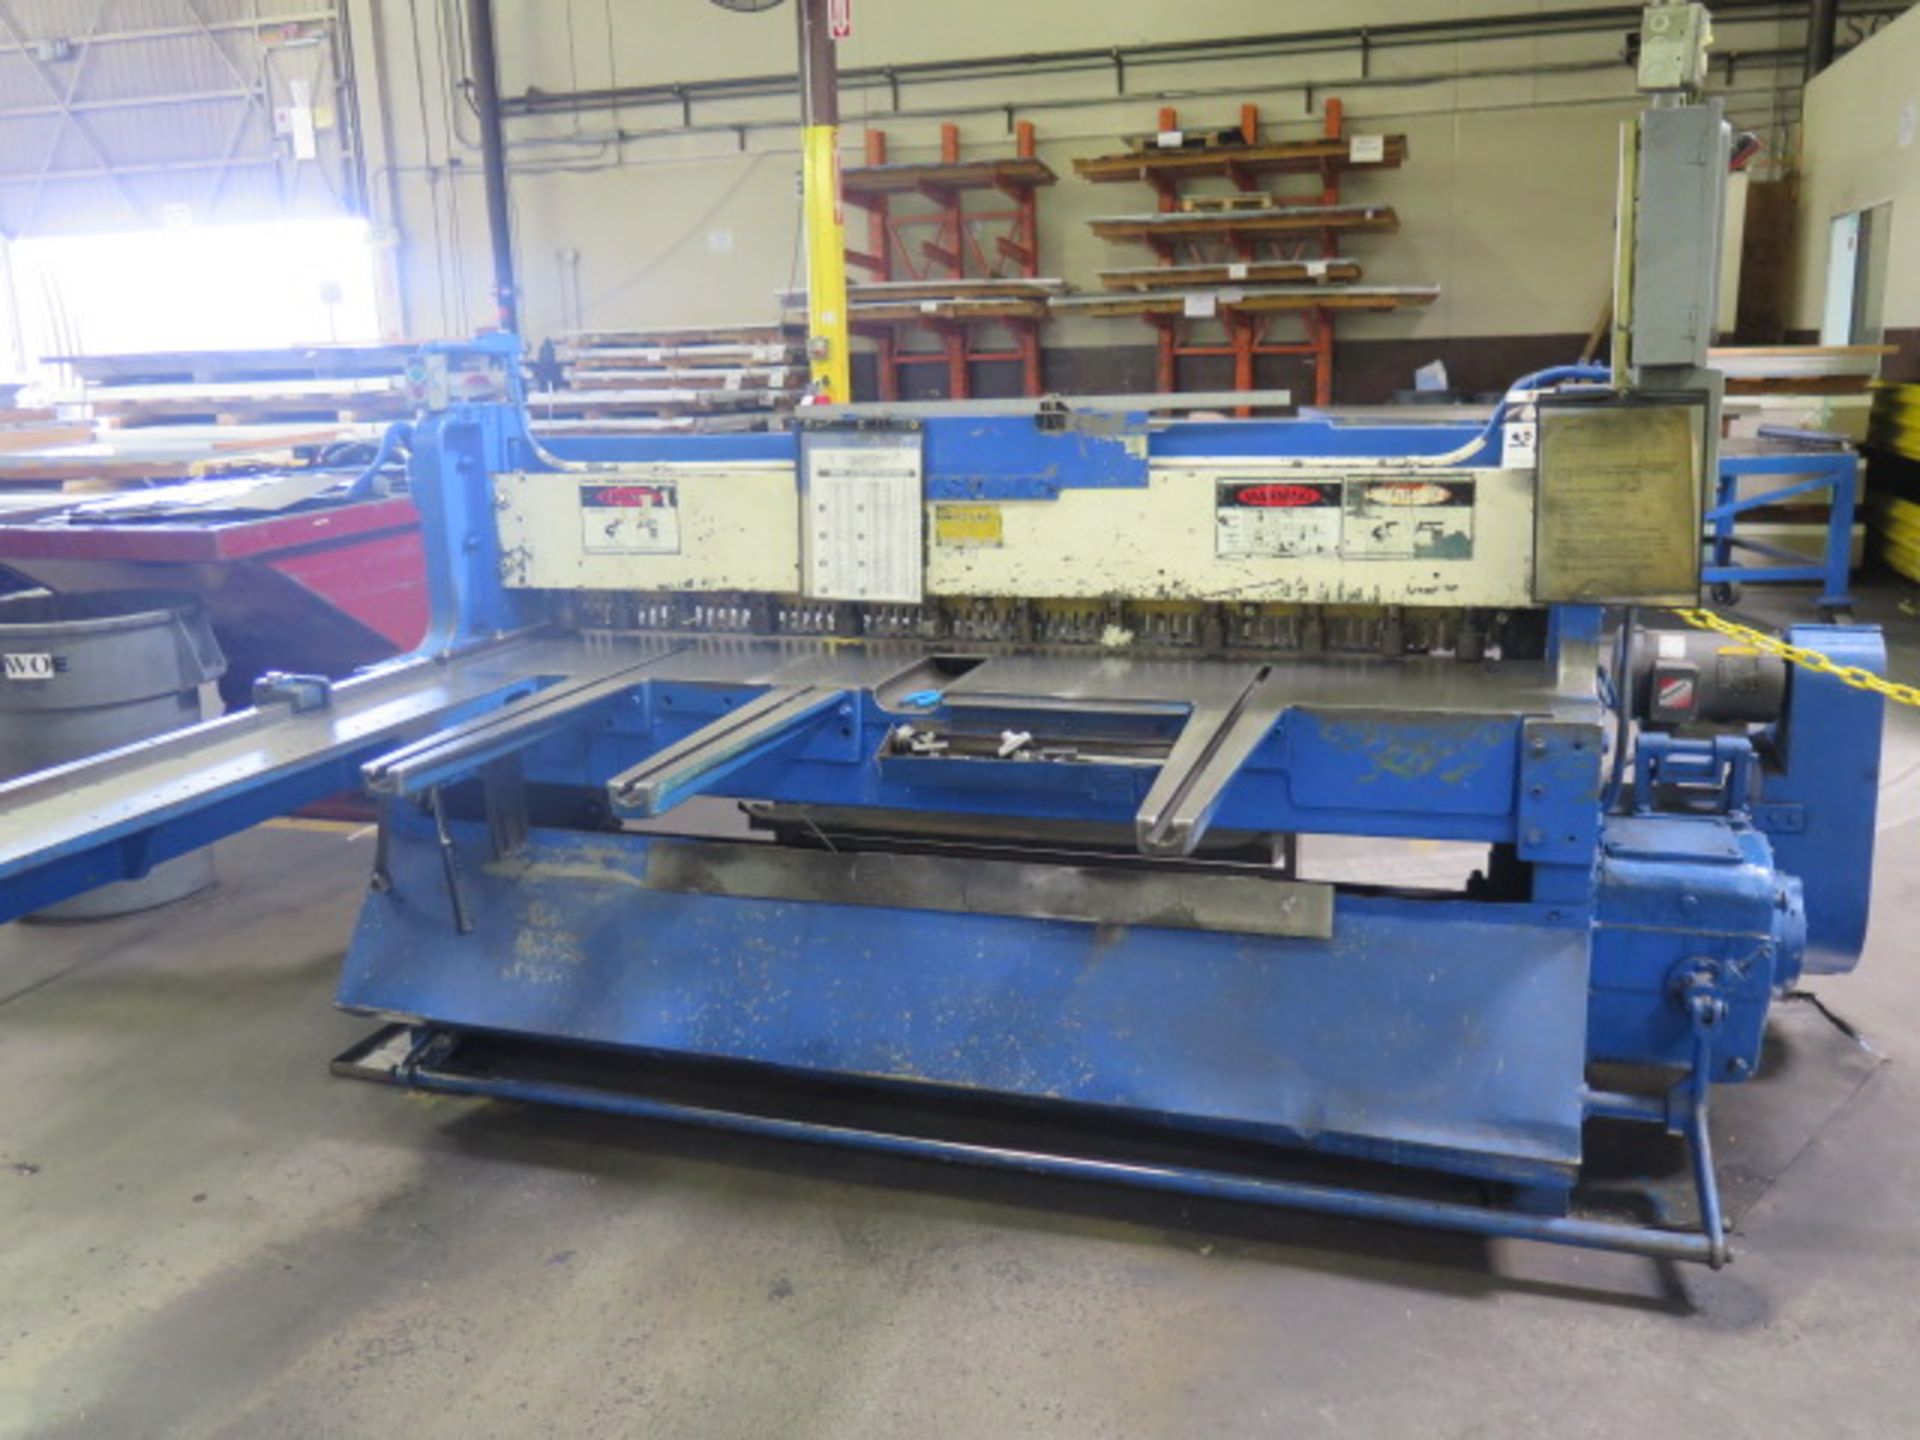 Wysong mdl. 1472 14GA x 72" Power Shear s/nP15-4521 w/80" Sq, Front Supports, NO BACK GA, SOLD AS IS - Image 2 of 11